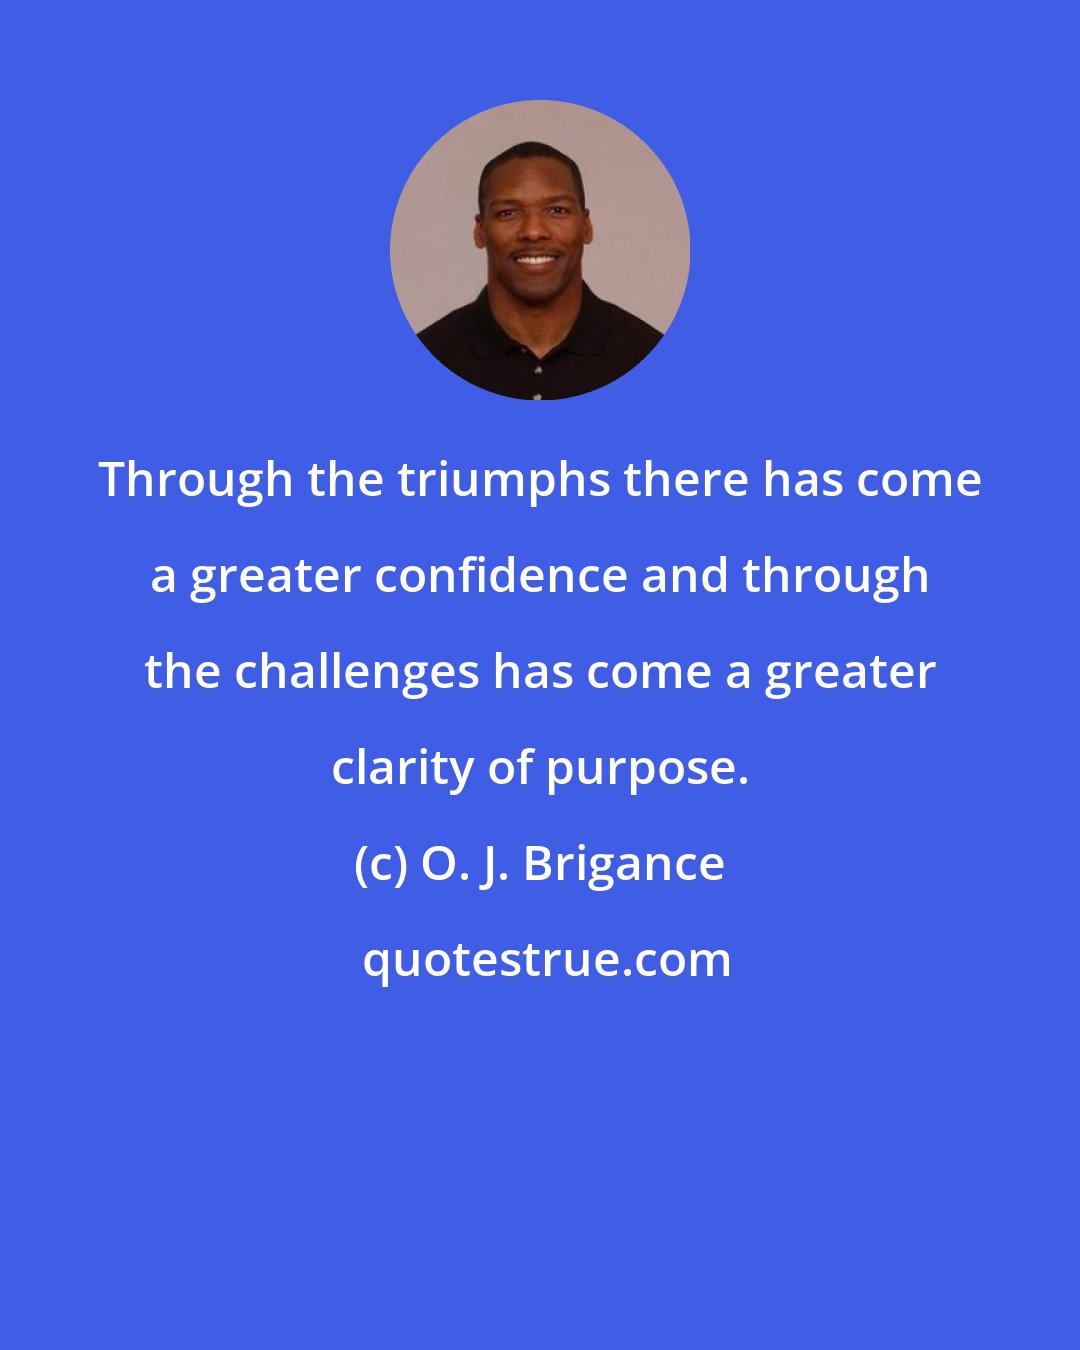 O. J. Brigance: Through the triumphs there has come a greater confidence and through the challenges has come a greater clarity of purpose.